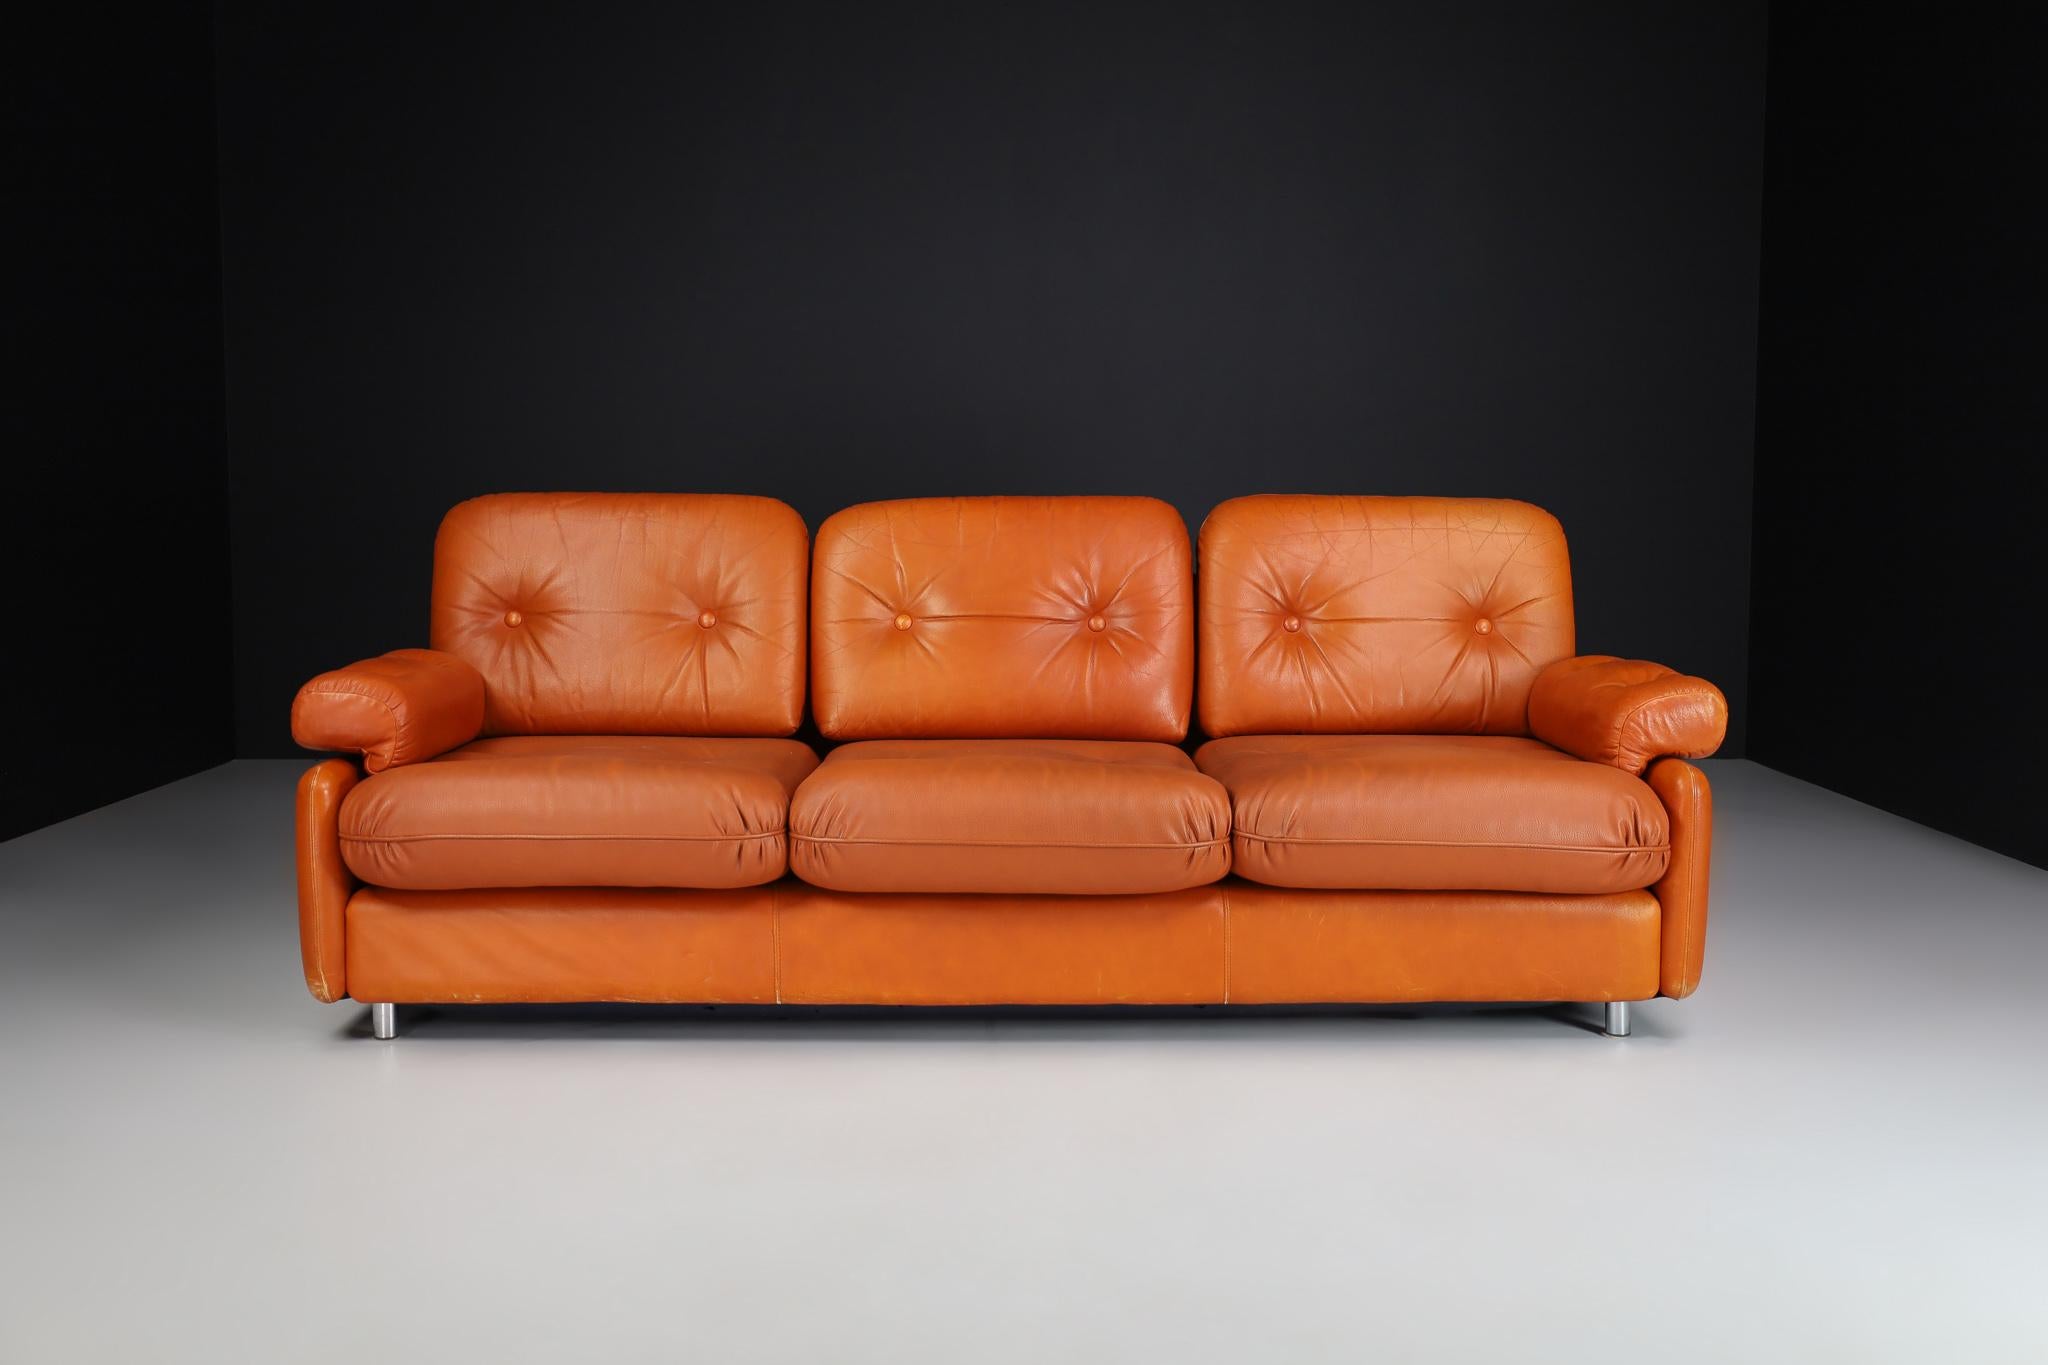 Mid-Century Modern leather three seat lounge sofa, Germany 1960s

Mid-century modern leather three seat lounge sofa manufactured and designed in Germany 1960s. It is in lovely vintage condition, with a minor patina on the leather. These armchairs